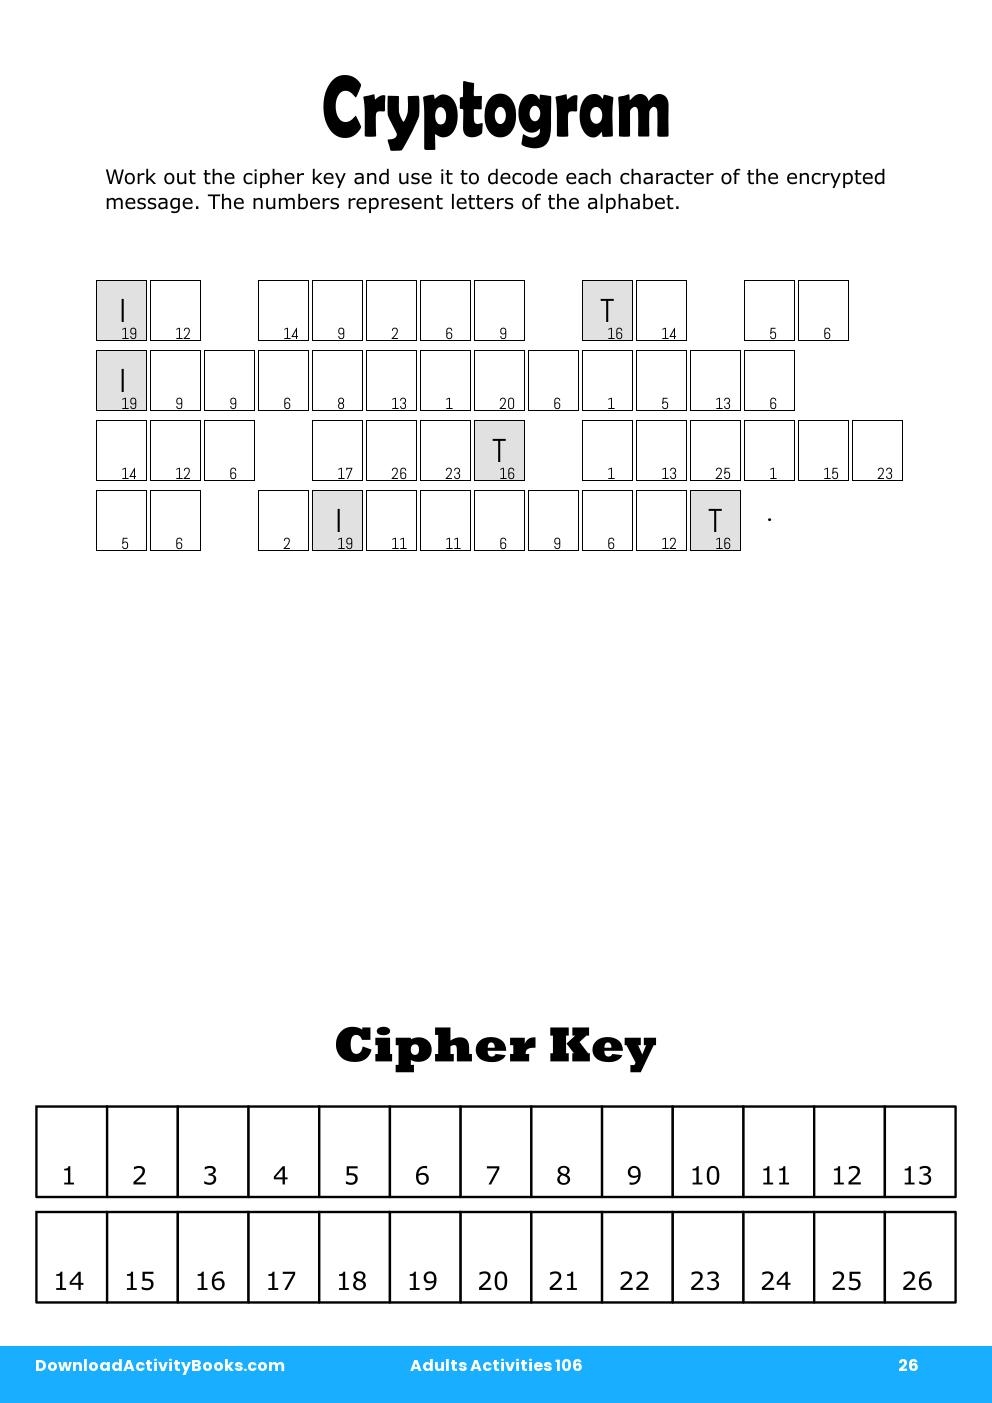 Cryptogram in Adults Activities 106